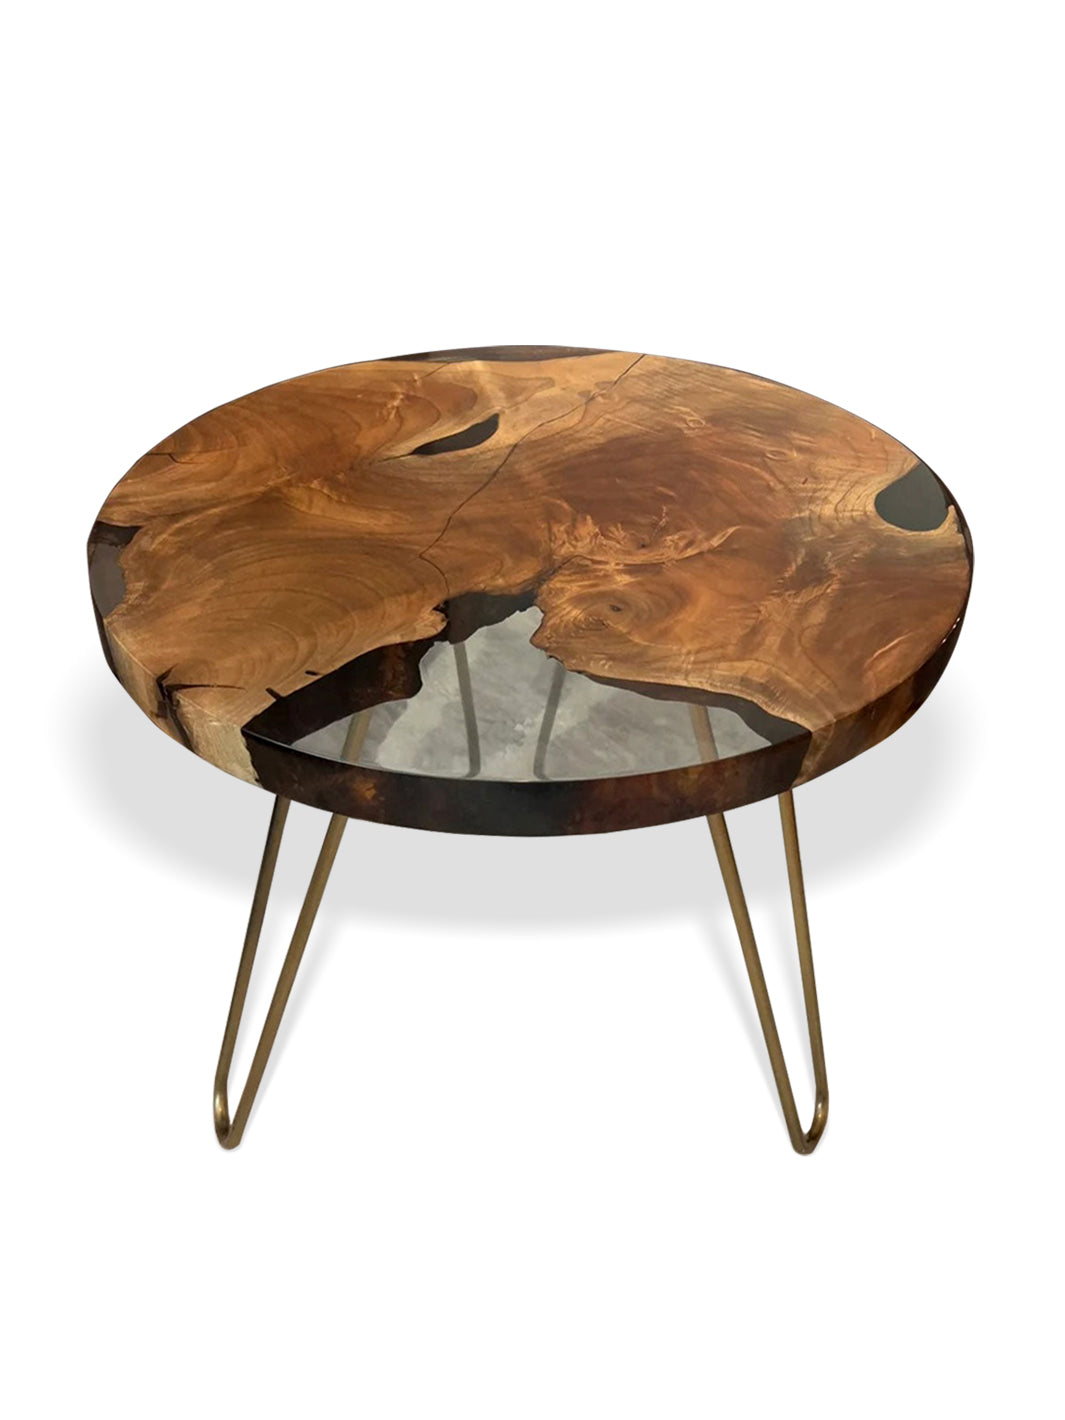 Walnut Clear Epoxy Resin Rounded Live Edge Coffee Table 23.5" Harden Coffee Tables HWC-0079